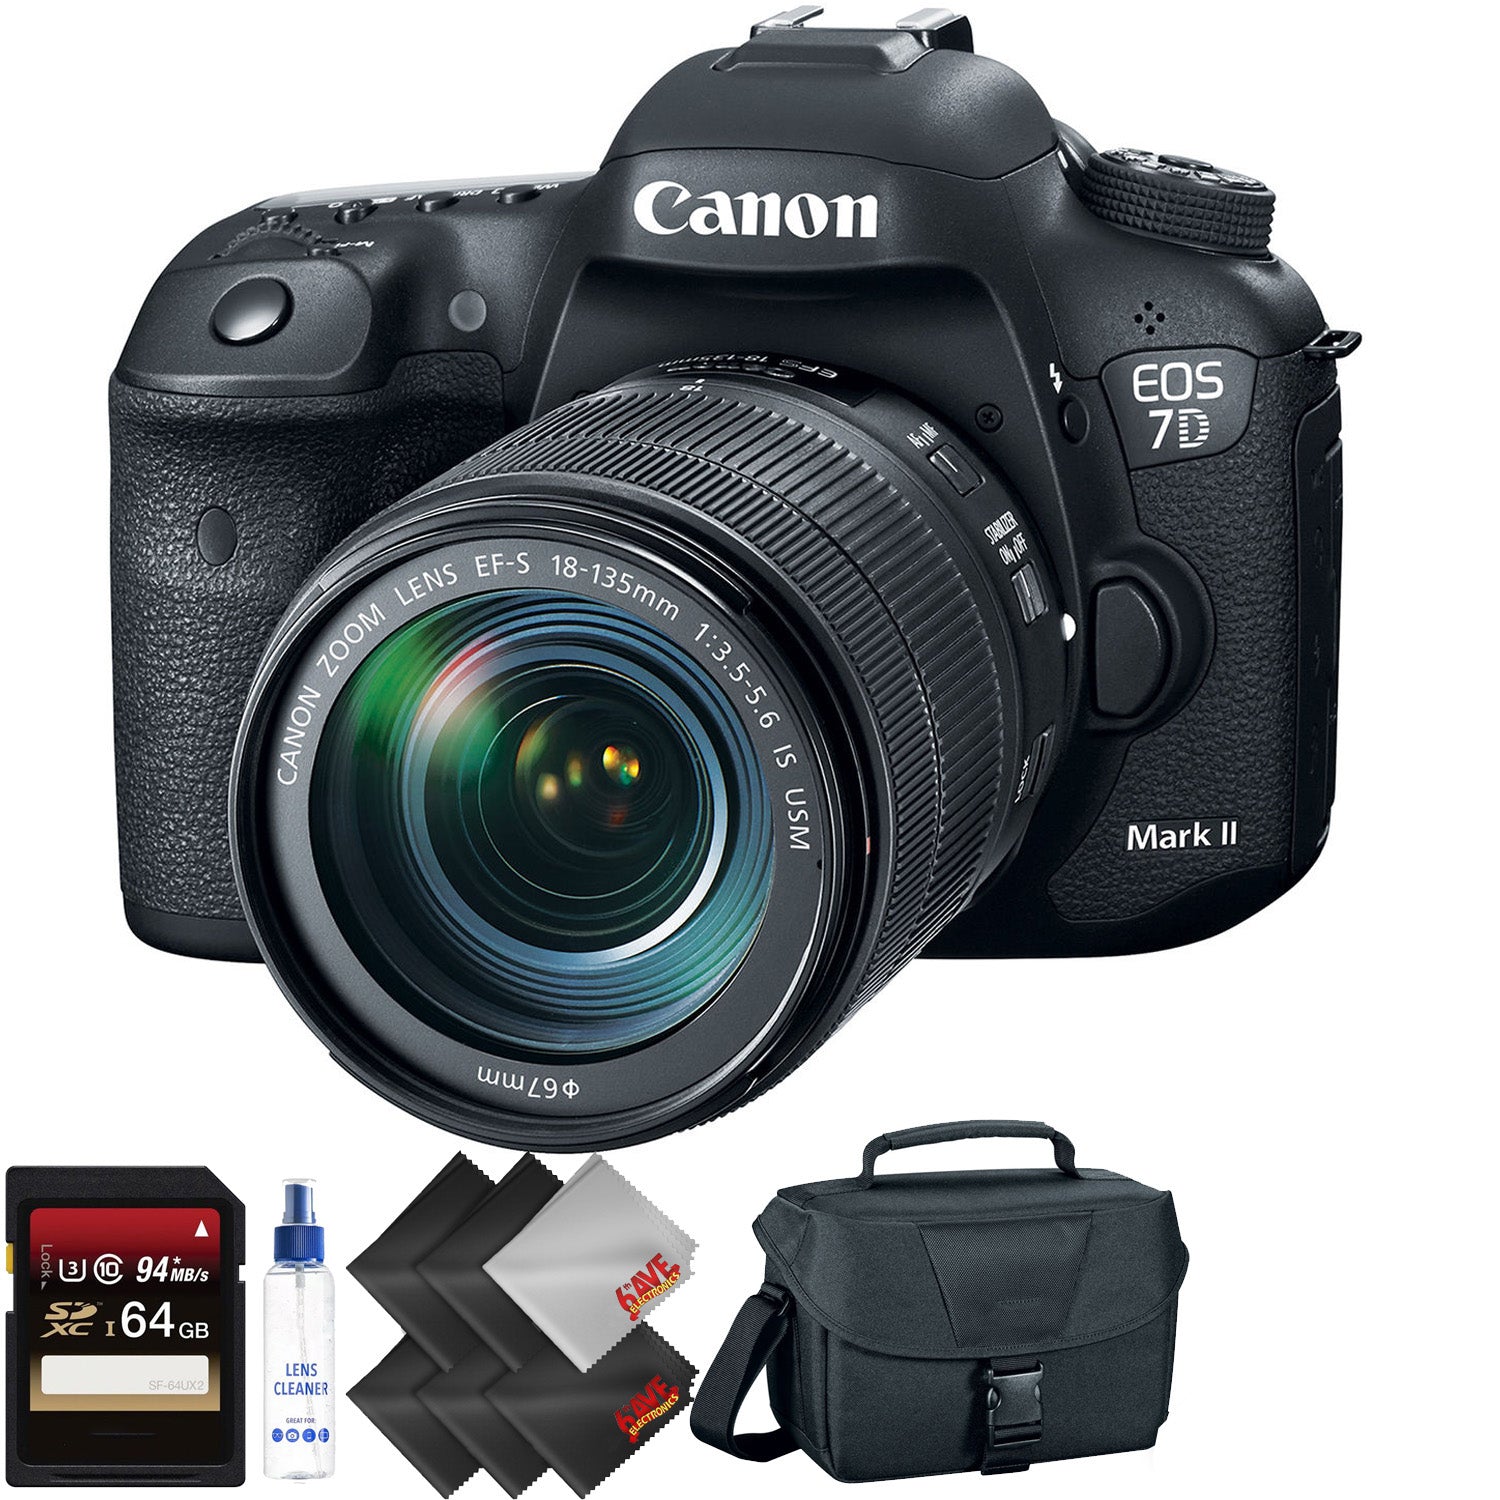 Canon EOS 7D Mark II DSLR Camera with 18-135mm f/3.5-5.6 is USM Lens & W-E1 Wi-Fi Adapter + 64GB Memory Card + 1 Year Wa